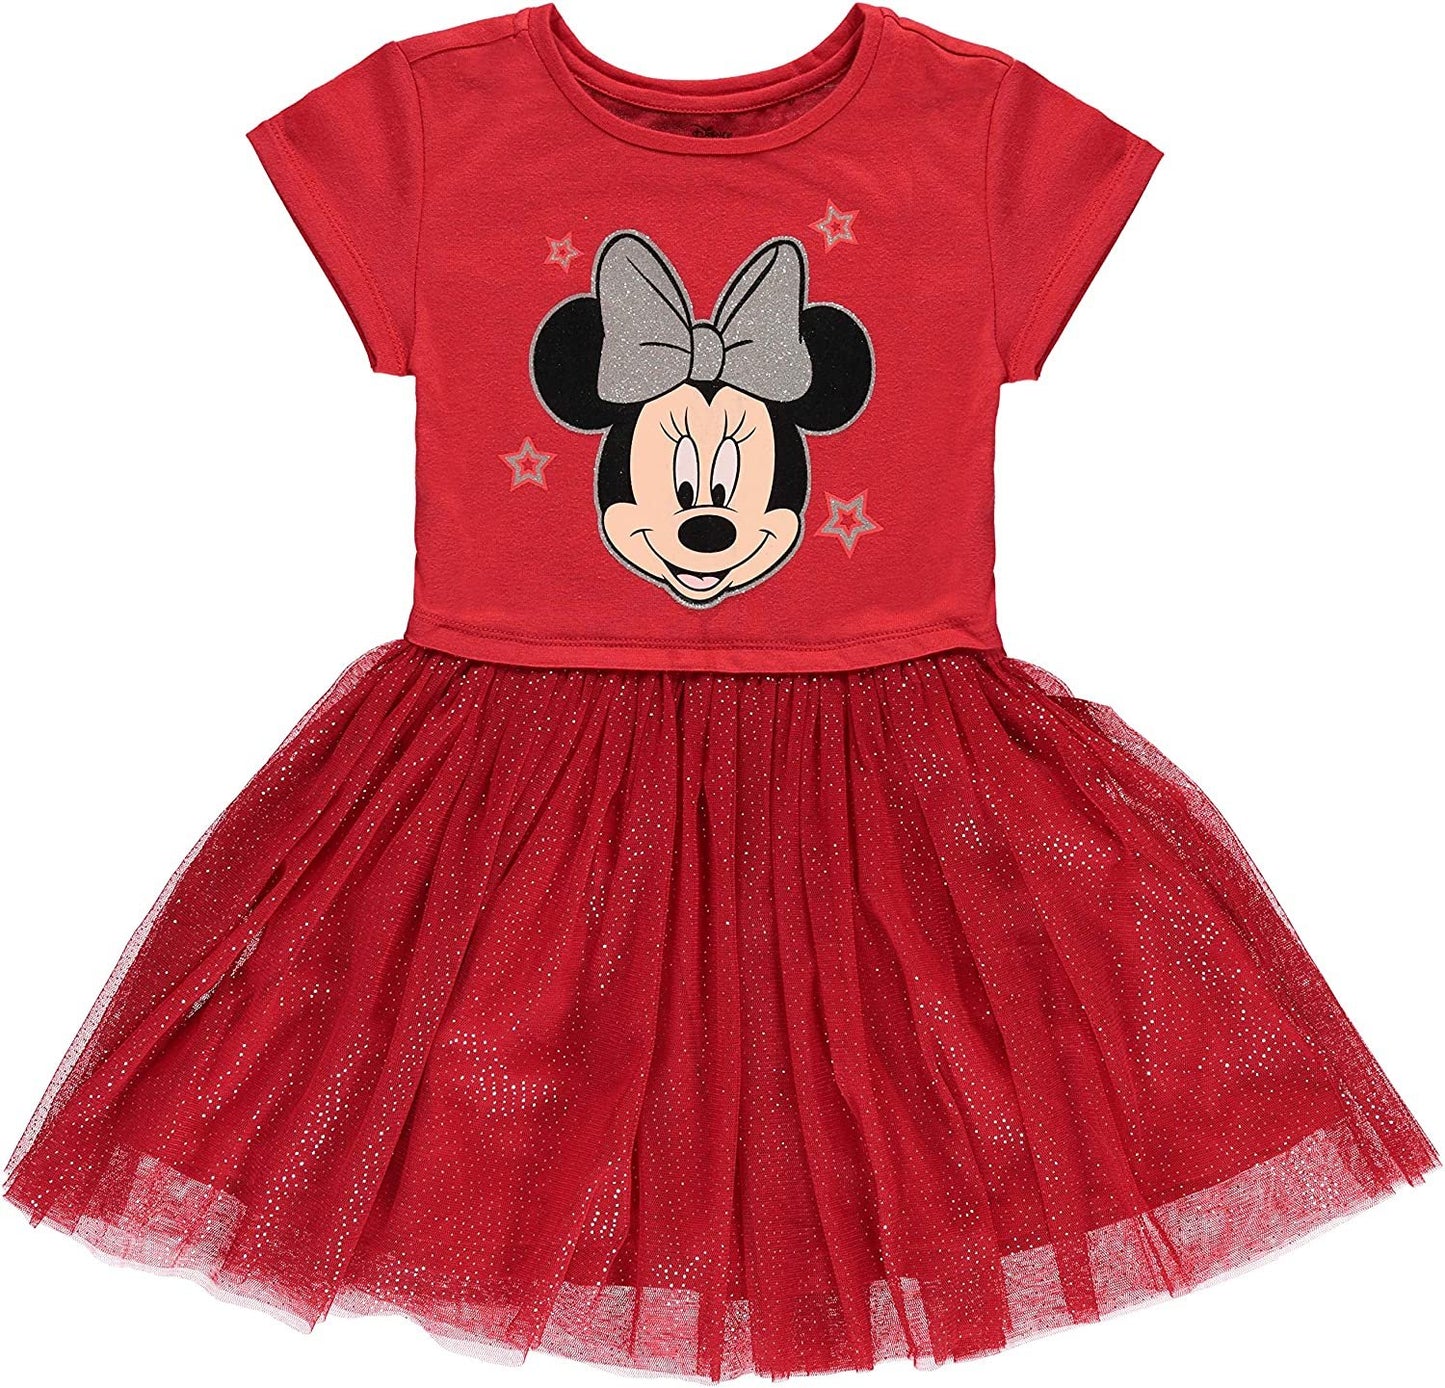 Disney Girls Red Minnie Mouse Dress- Minnie Mouse Tulle Tutu Dress- Sizes 4-16